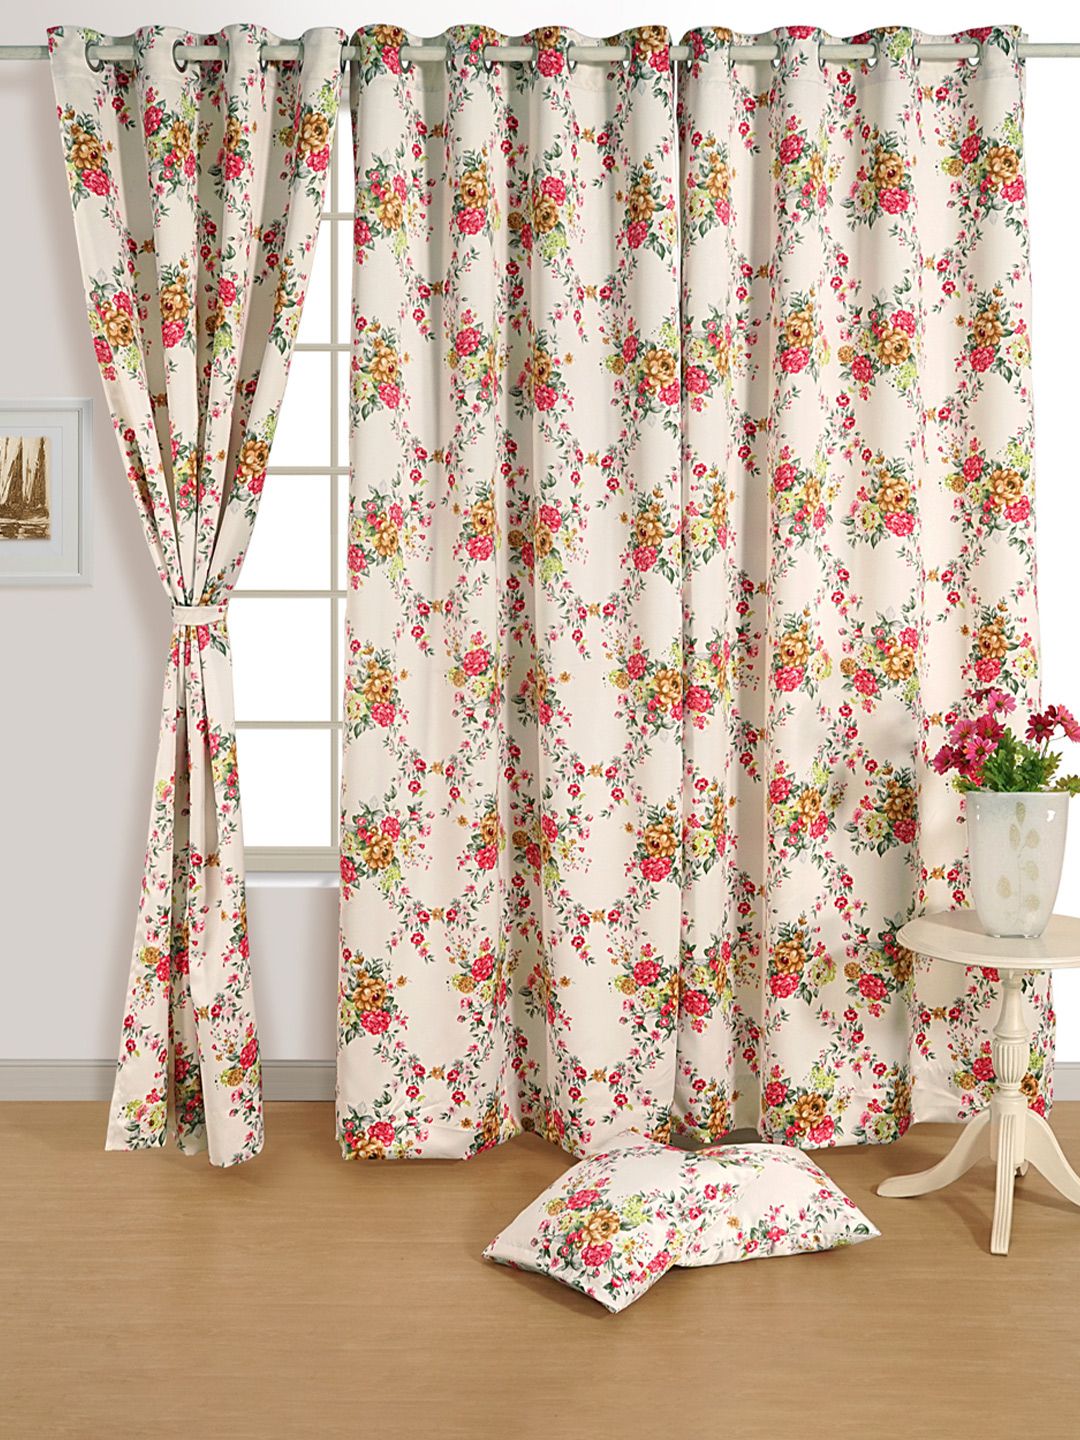 SWAYAM Cream-Coloured & Red Floral Black Out Door Curtain Price in India